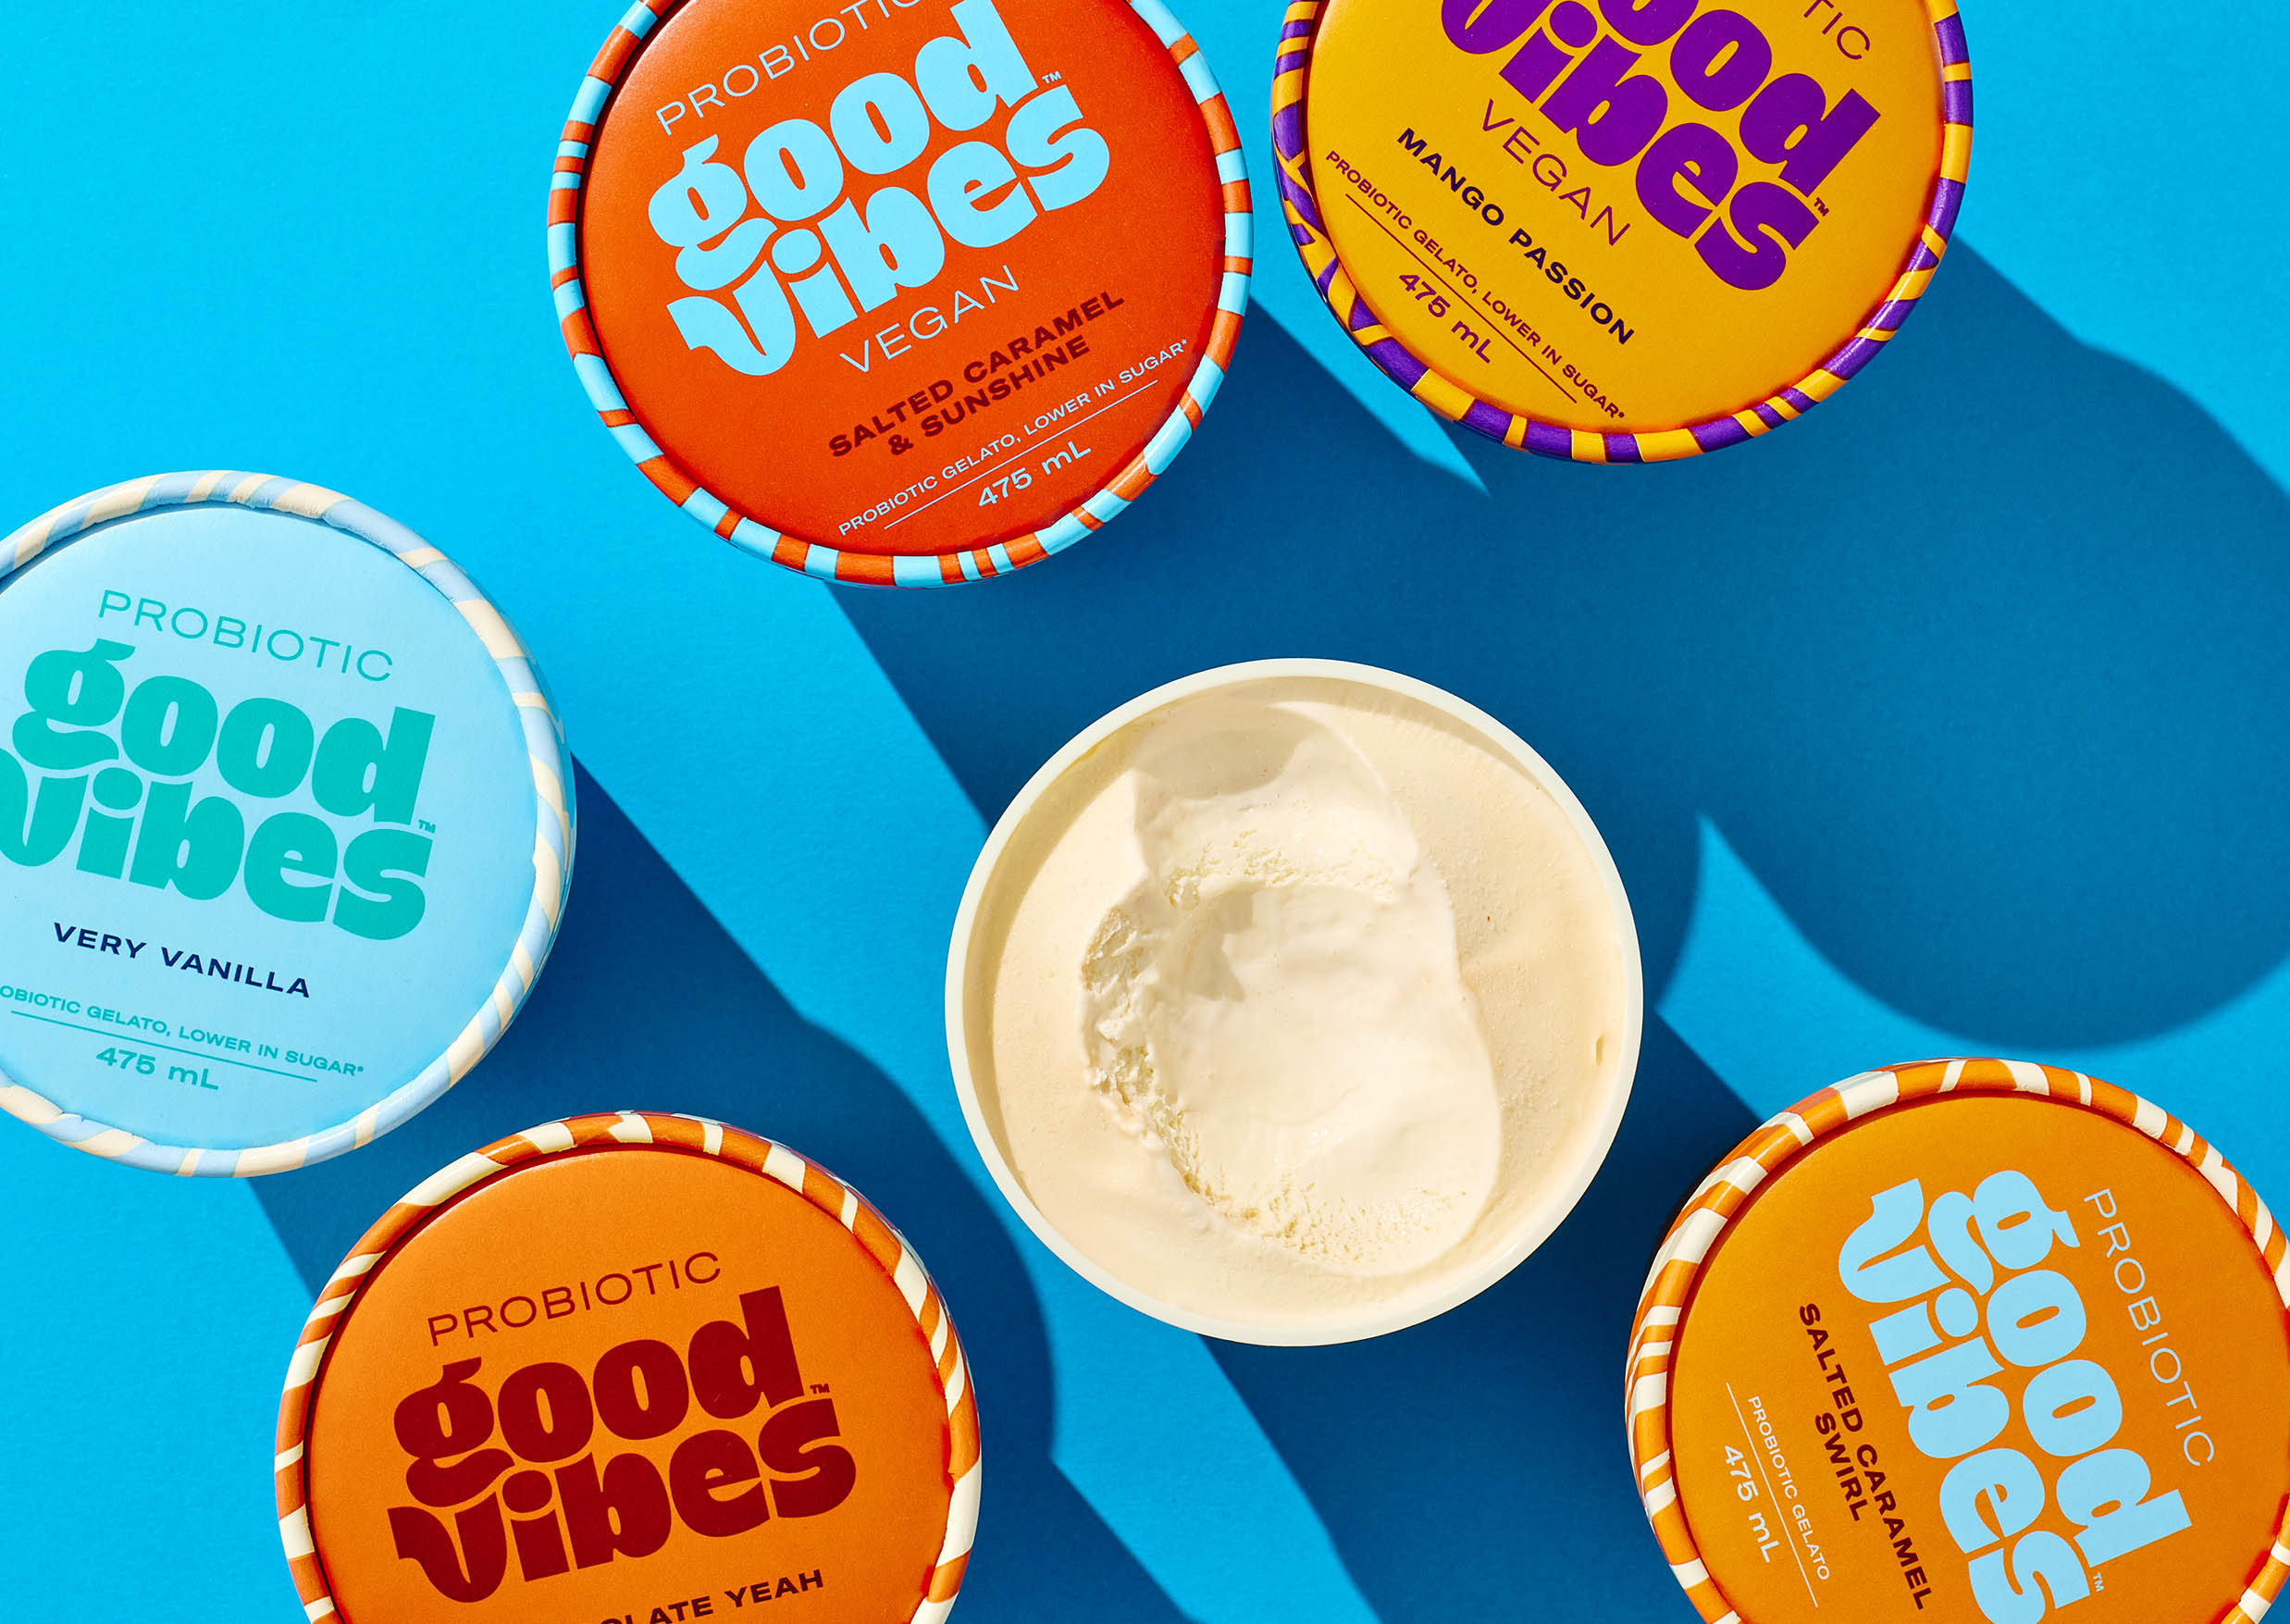 Wholesome and Organic Abstract Design for Good Vibes Probiotic Ice Cream by Marx Design